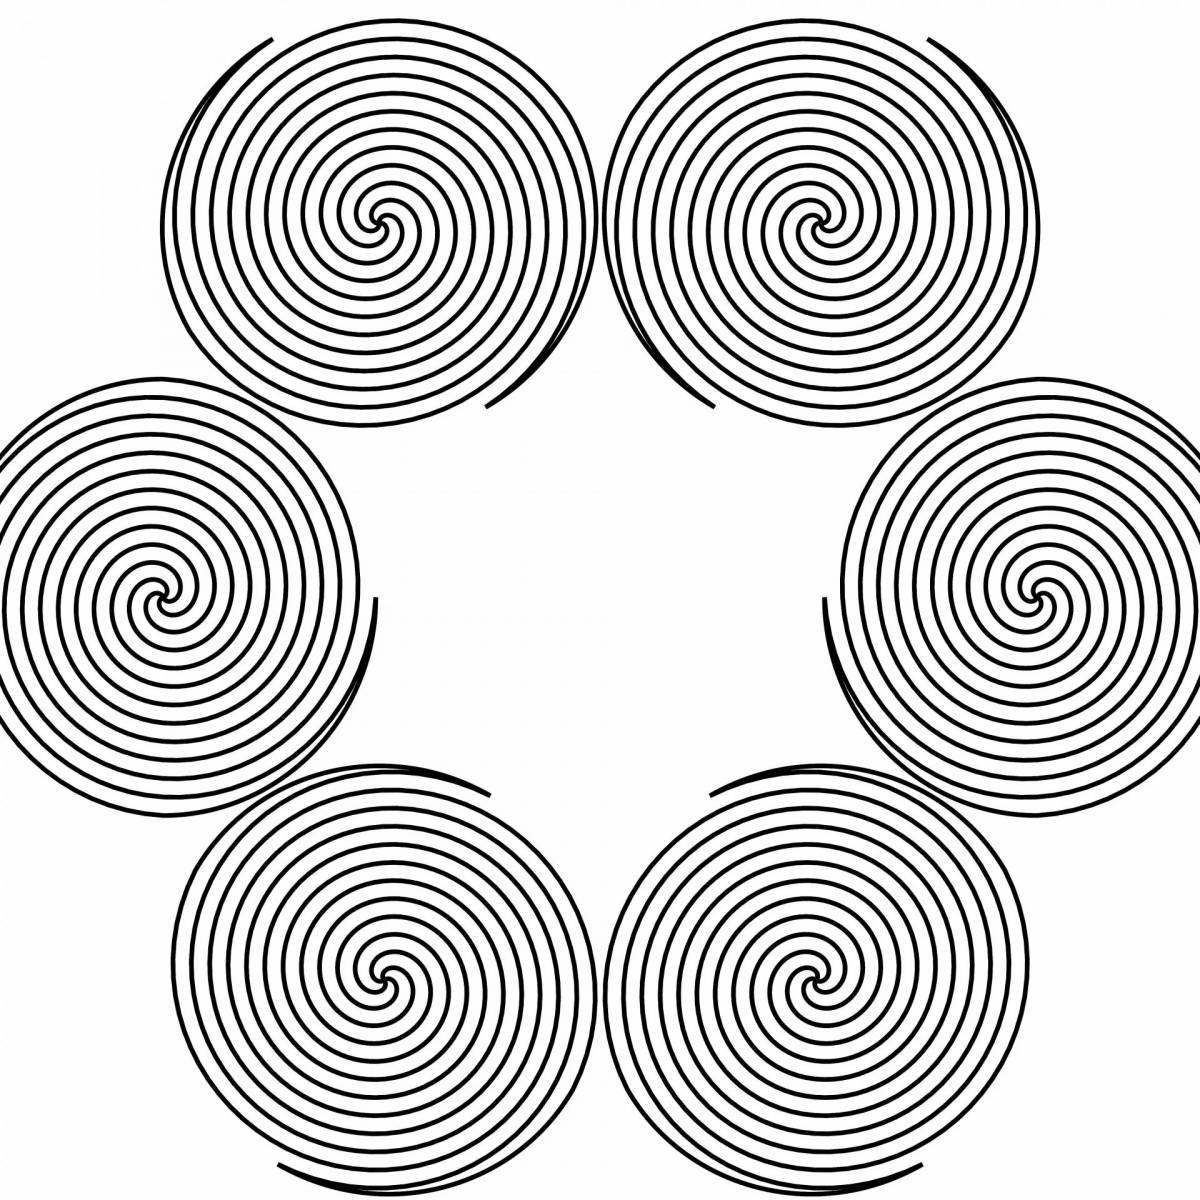 Choi glowing spiral coloring page